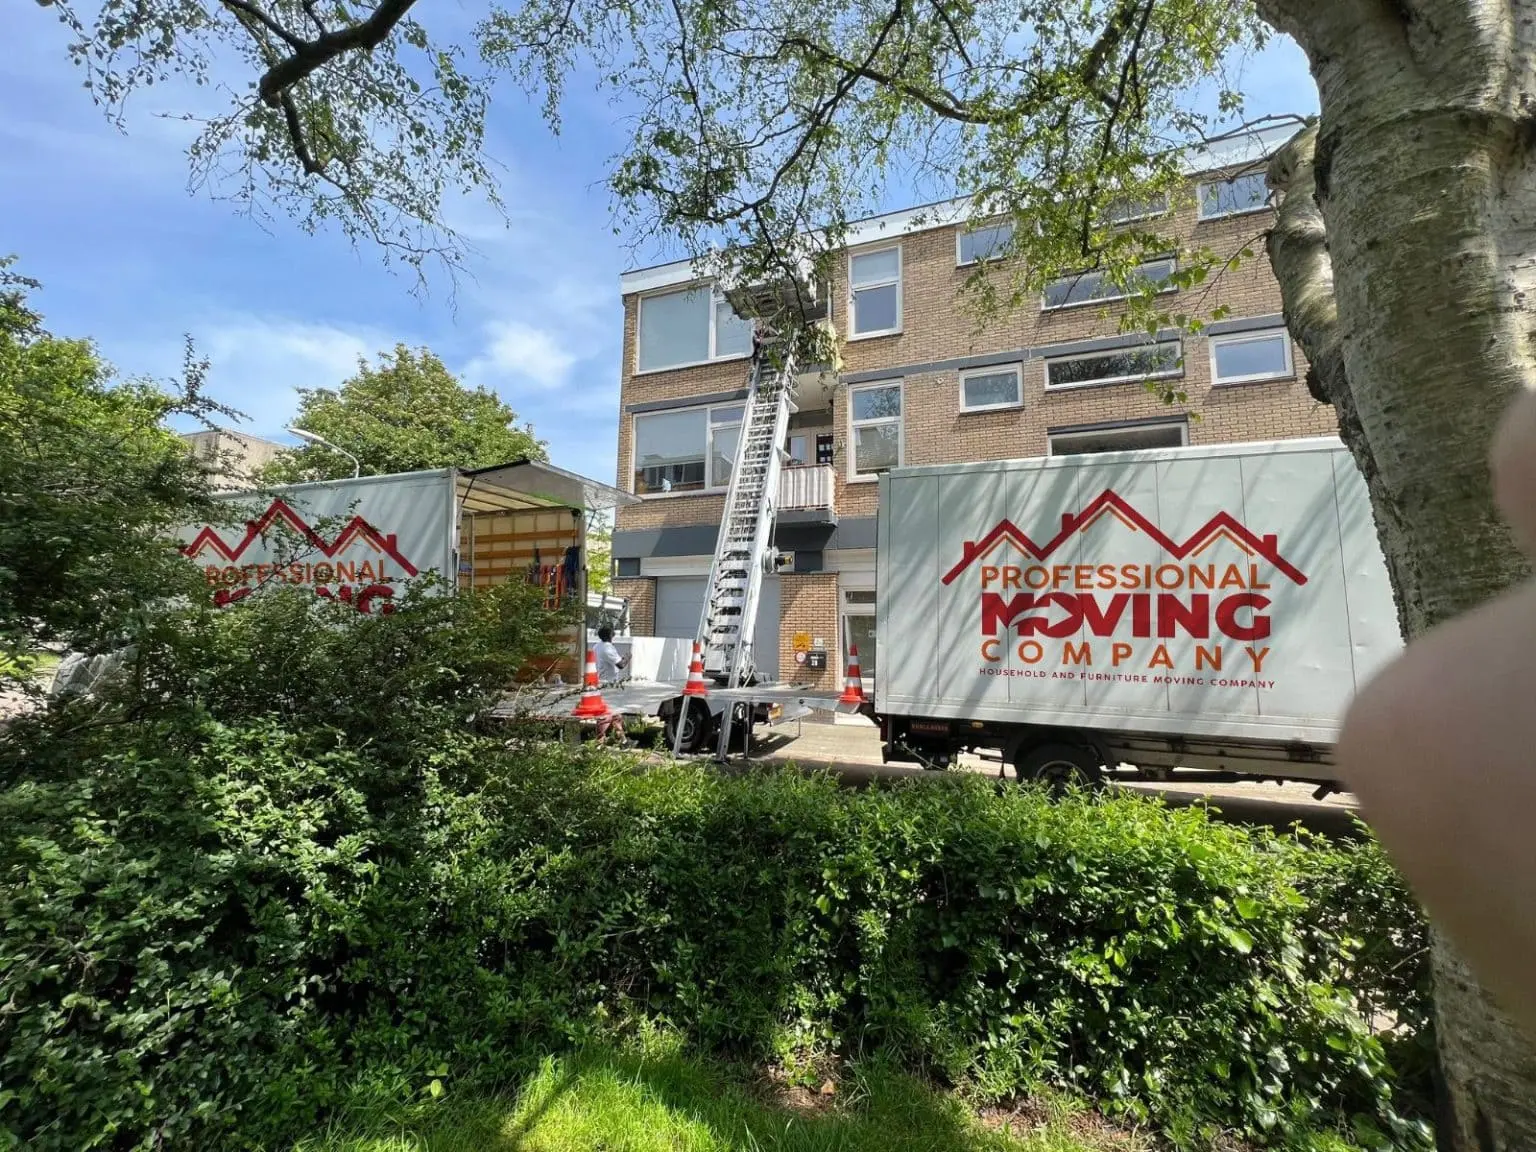 Moving company Wijdemeren Professional Moving Company 3